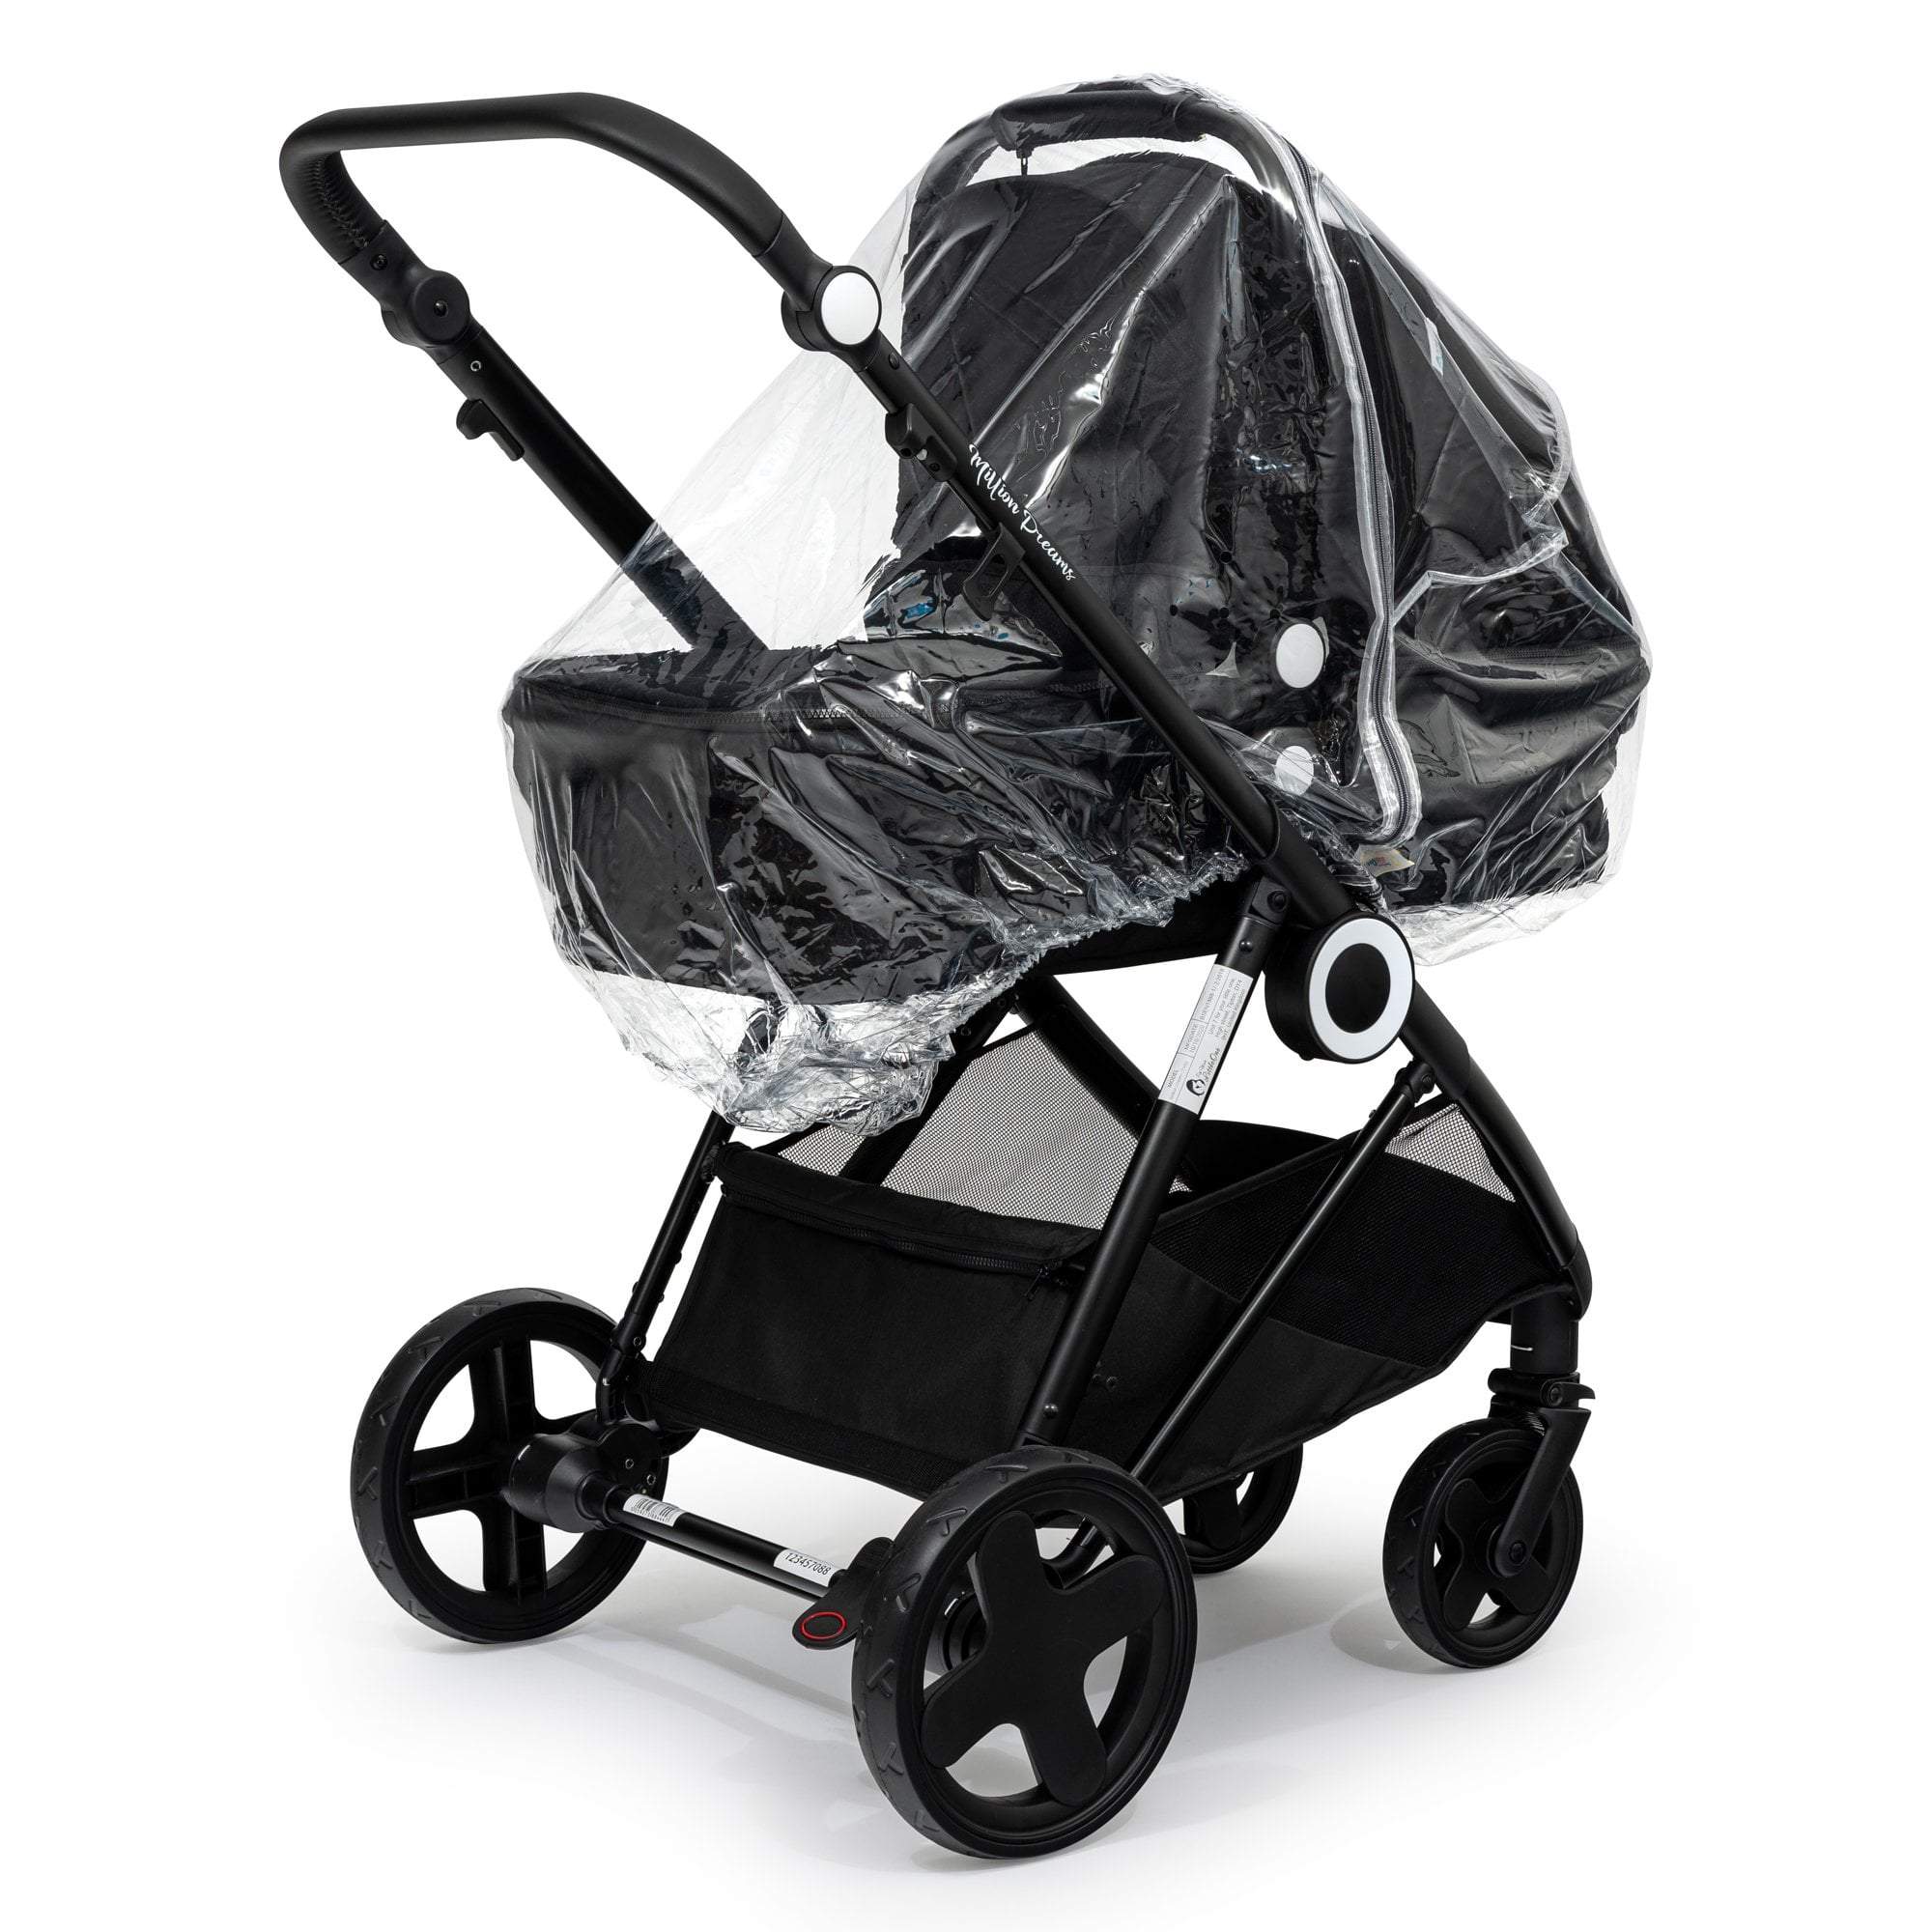 Carrycot Raincover Compatible With Babyzen - Fits All Models - For Your Little One